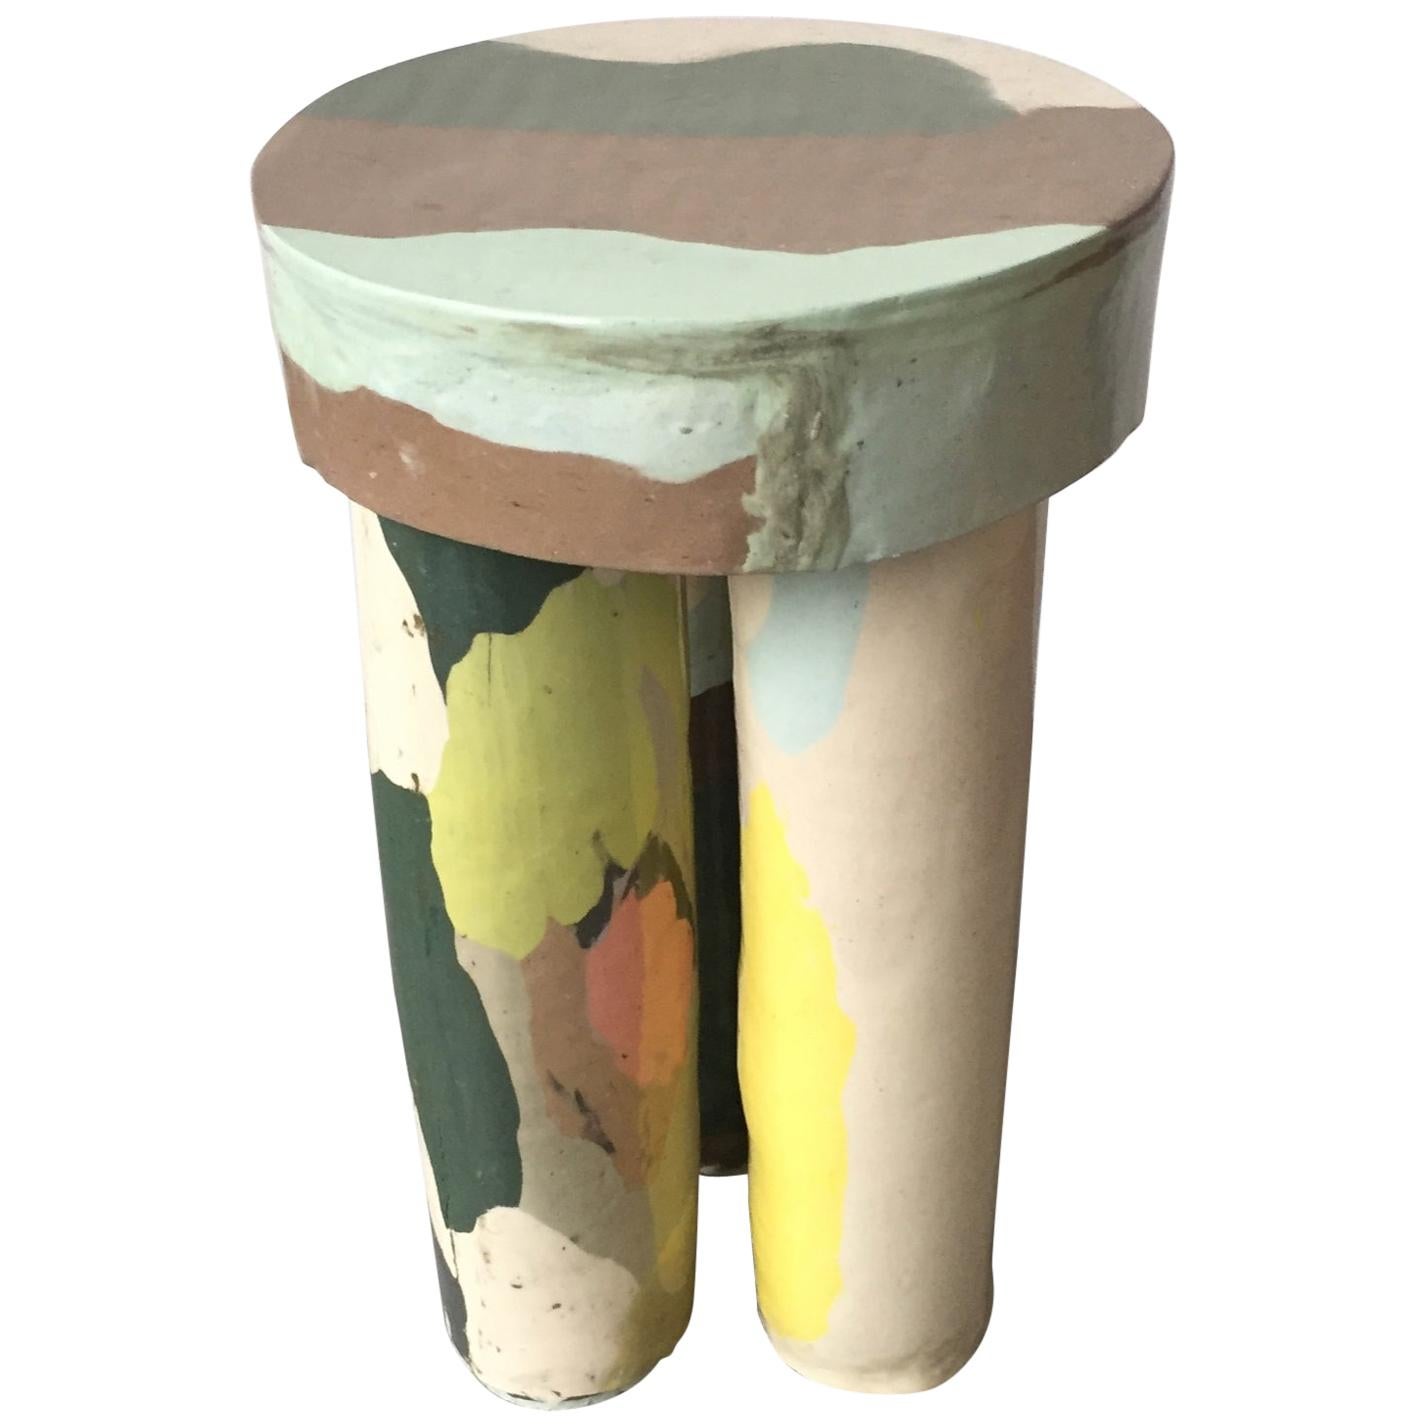 Stool in Hand-Built Glazed Ceramic by Katie Stout, 2018